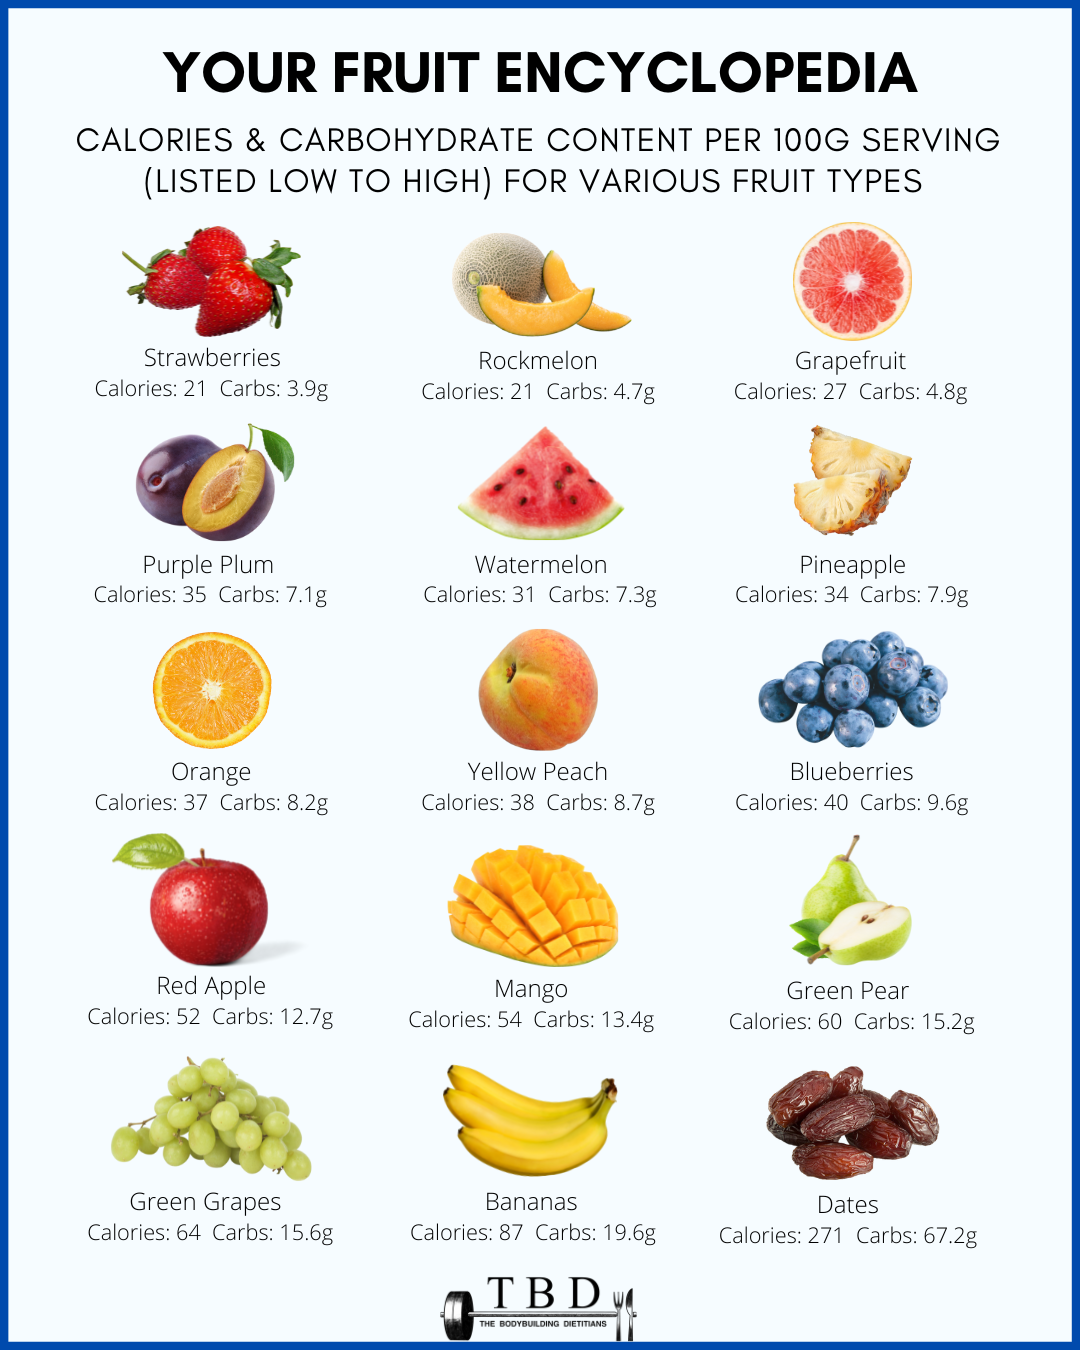 low-carb-and-high-carb-fruits-ranked-per-100g-serving-the